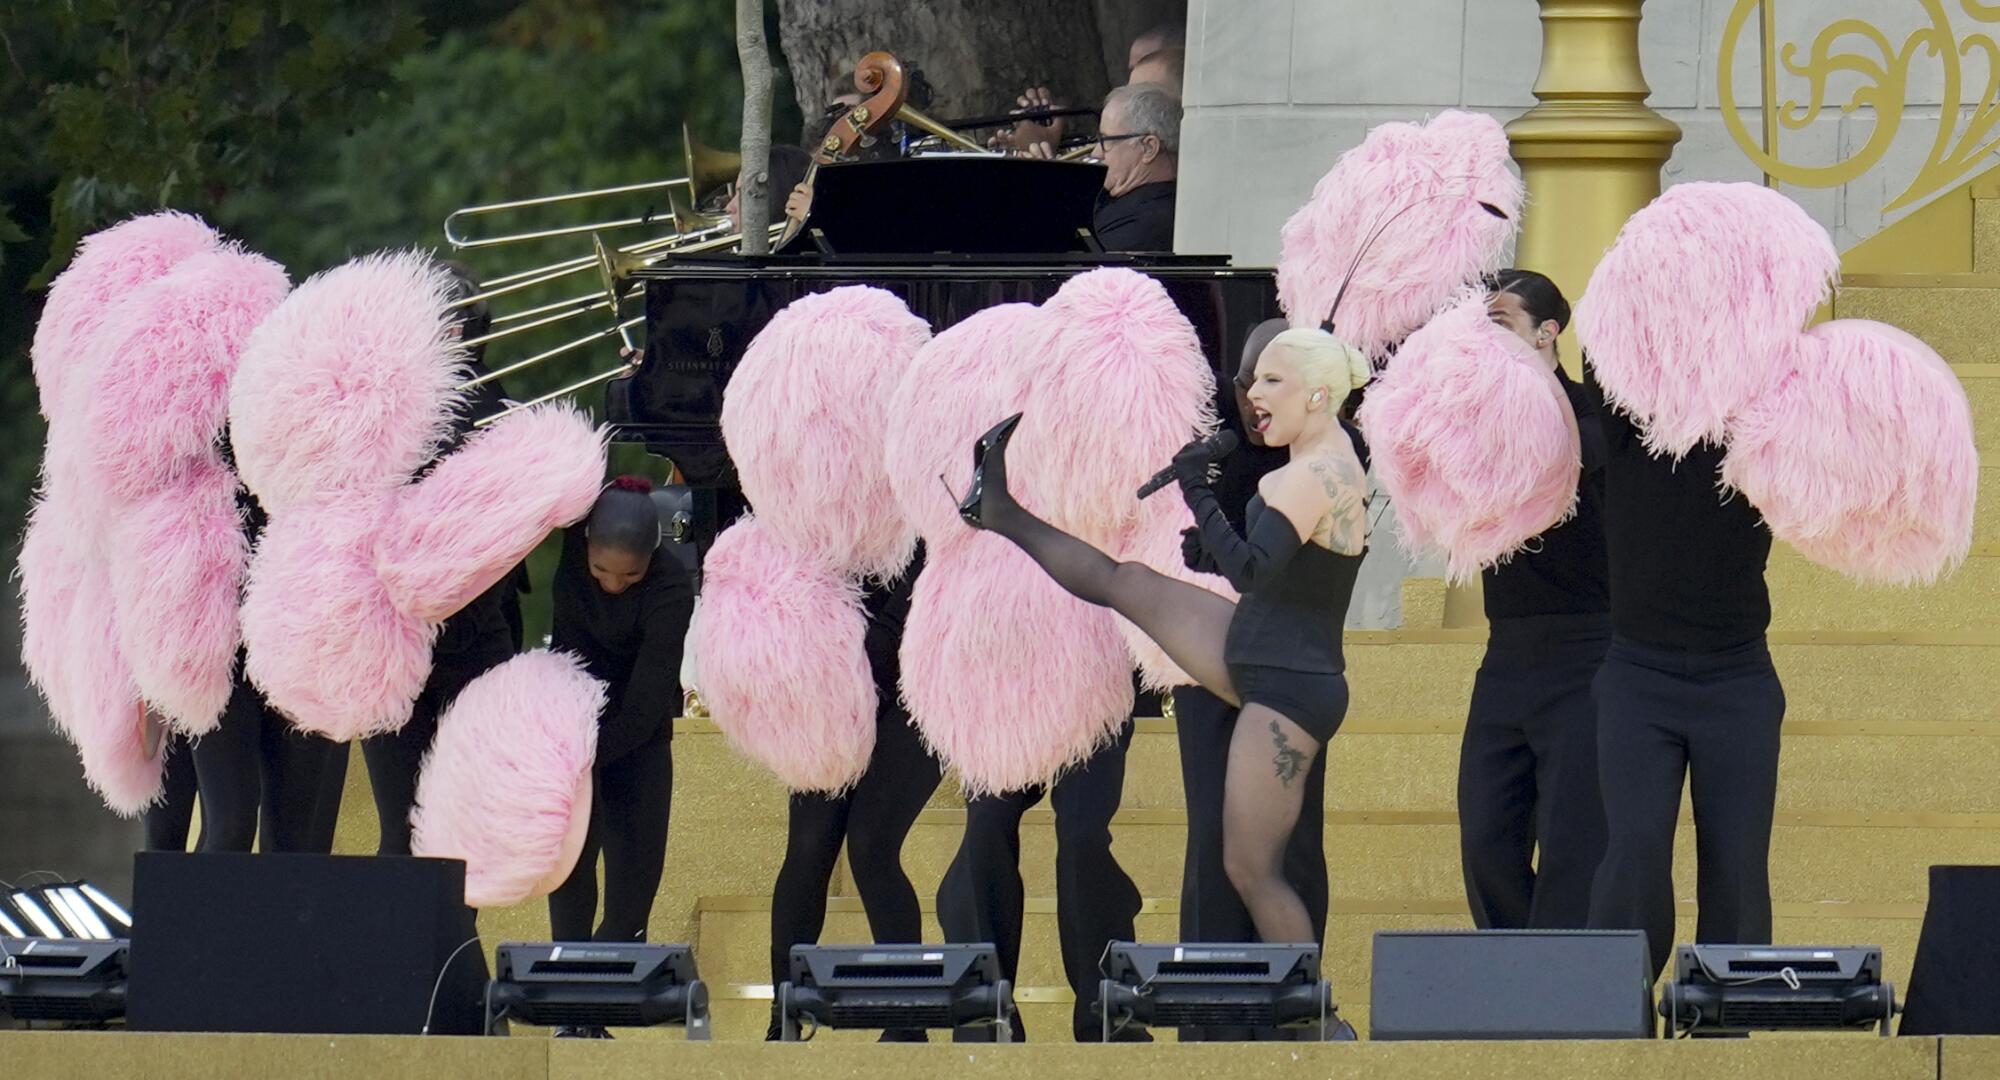 Lady Gaga kicking up a leg on a golden platform surrounded by dancers holding pink plumes.